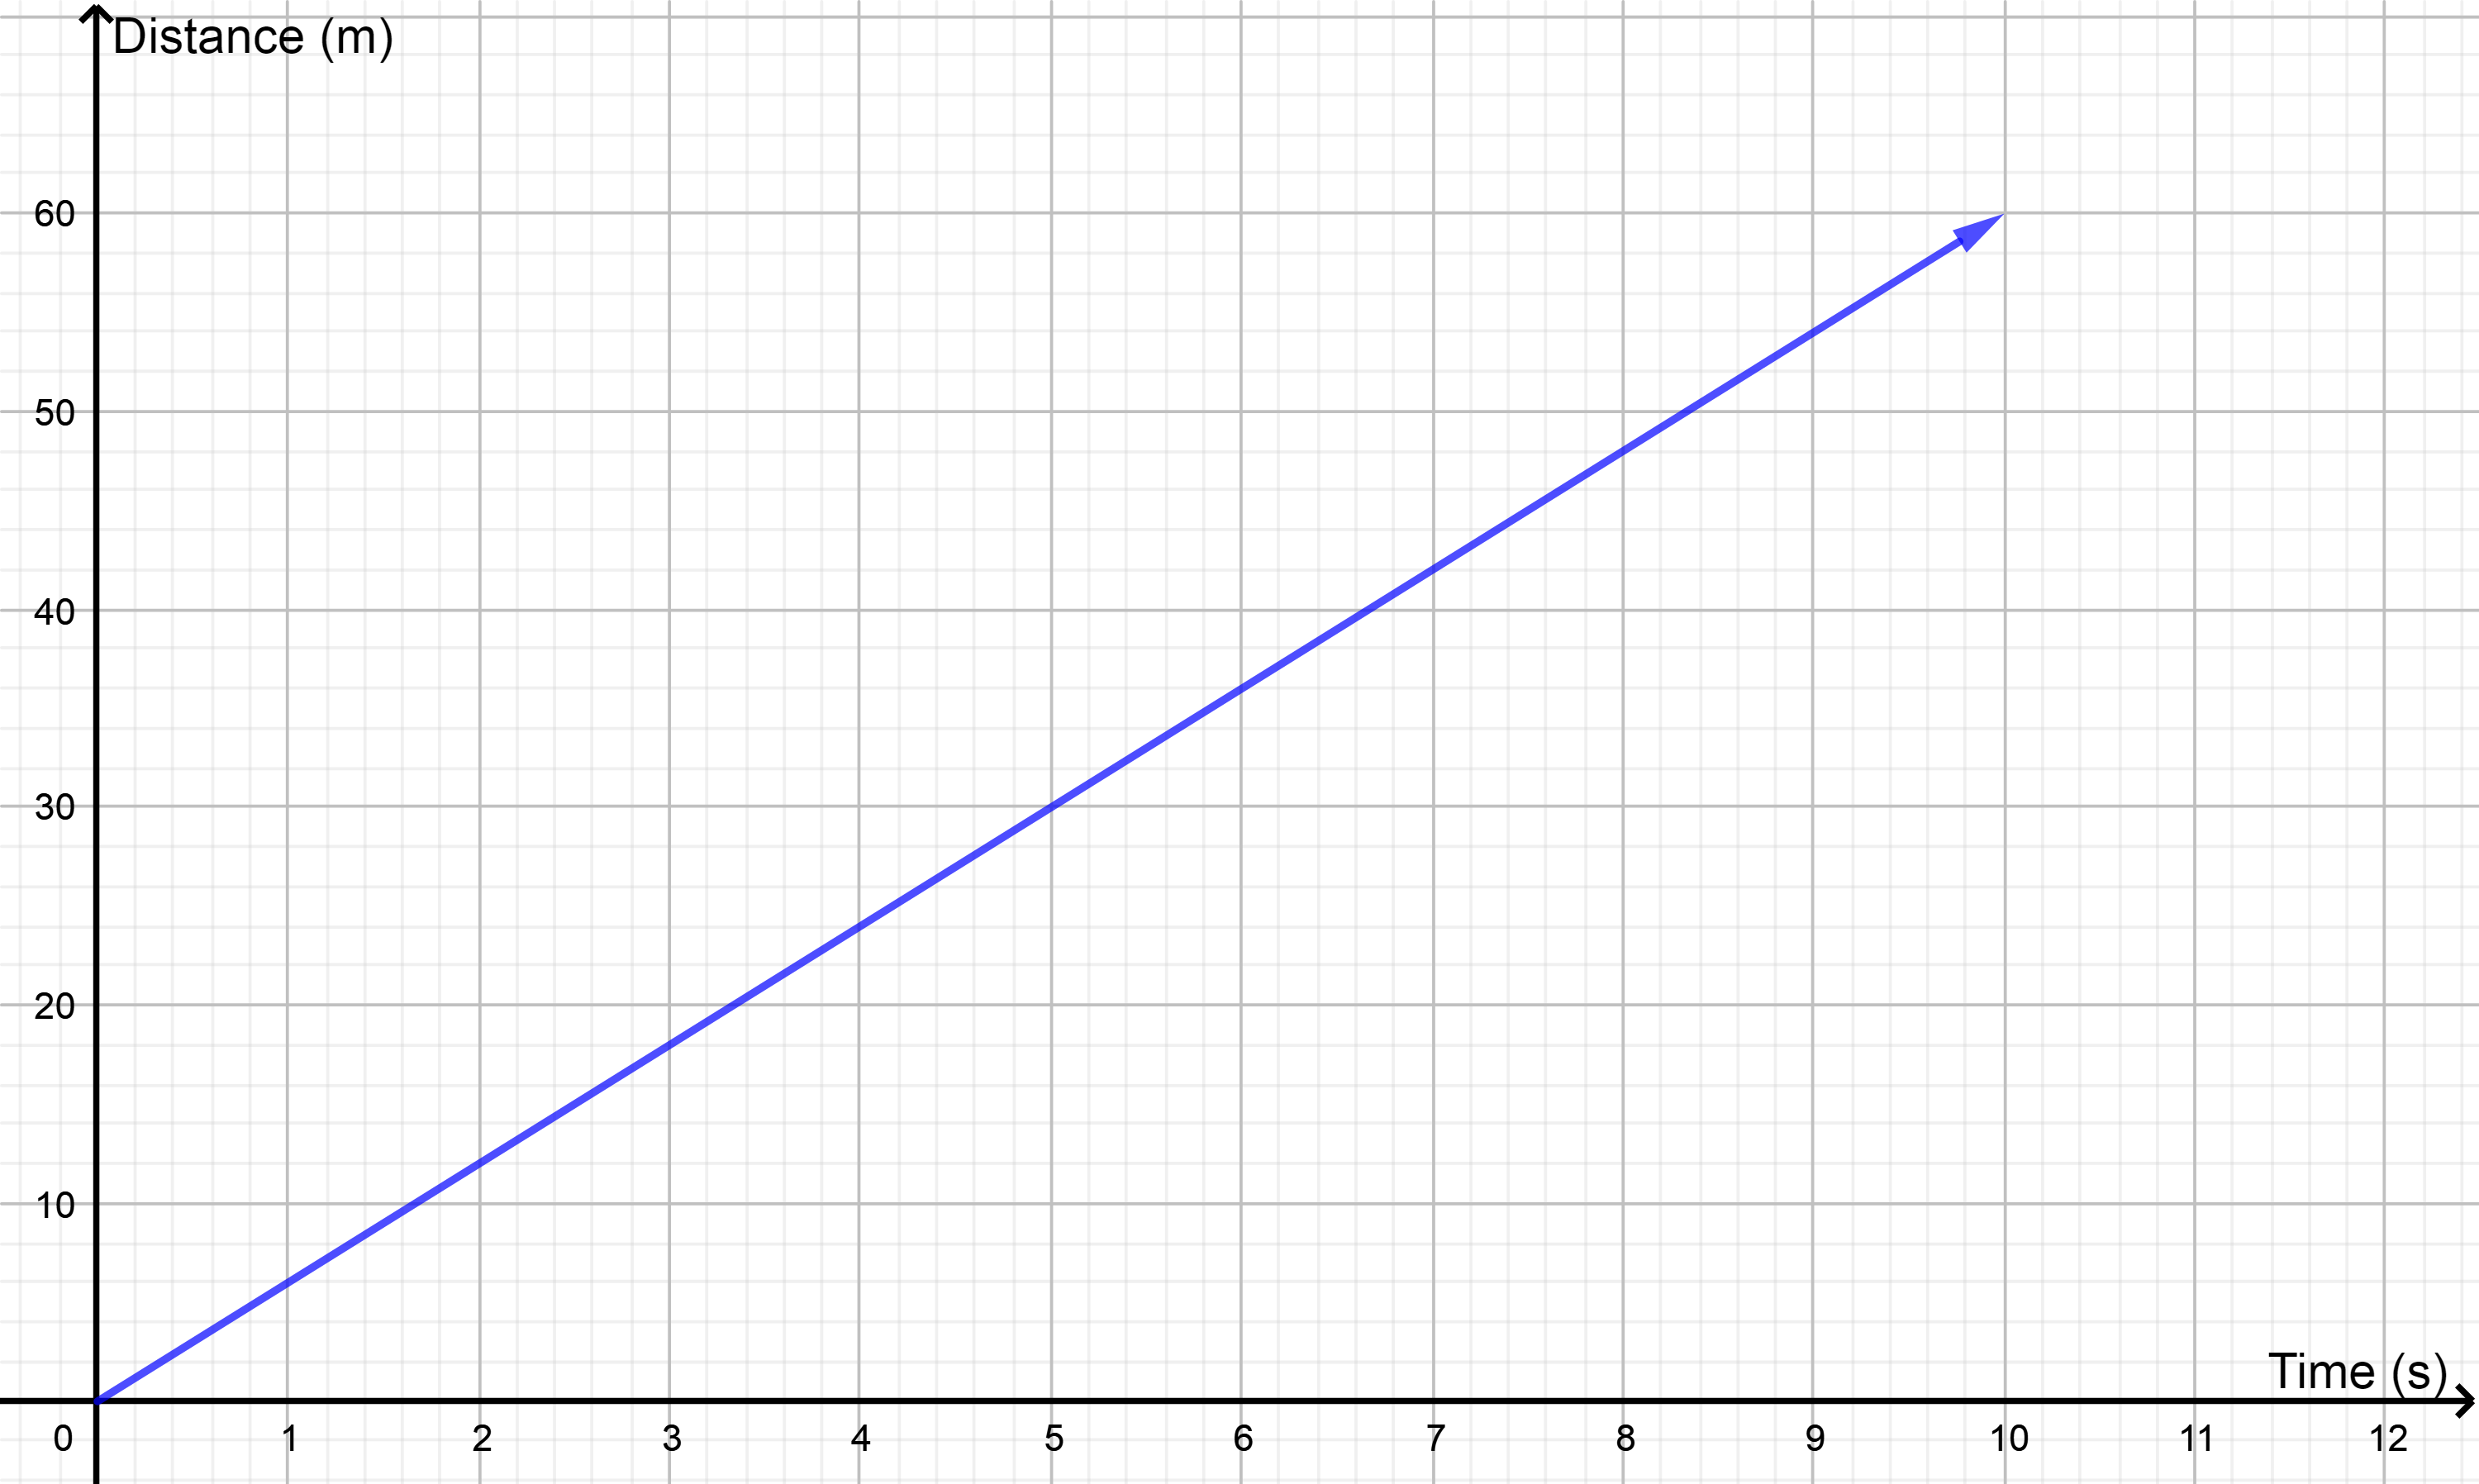 Drawing Distance Time Graphs 